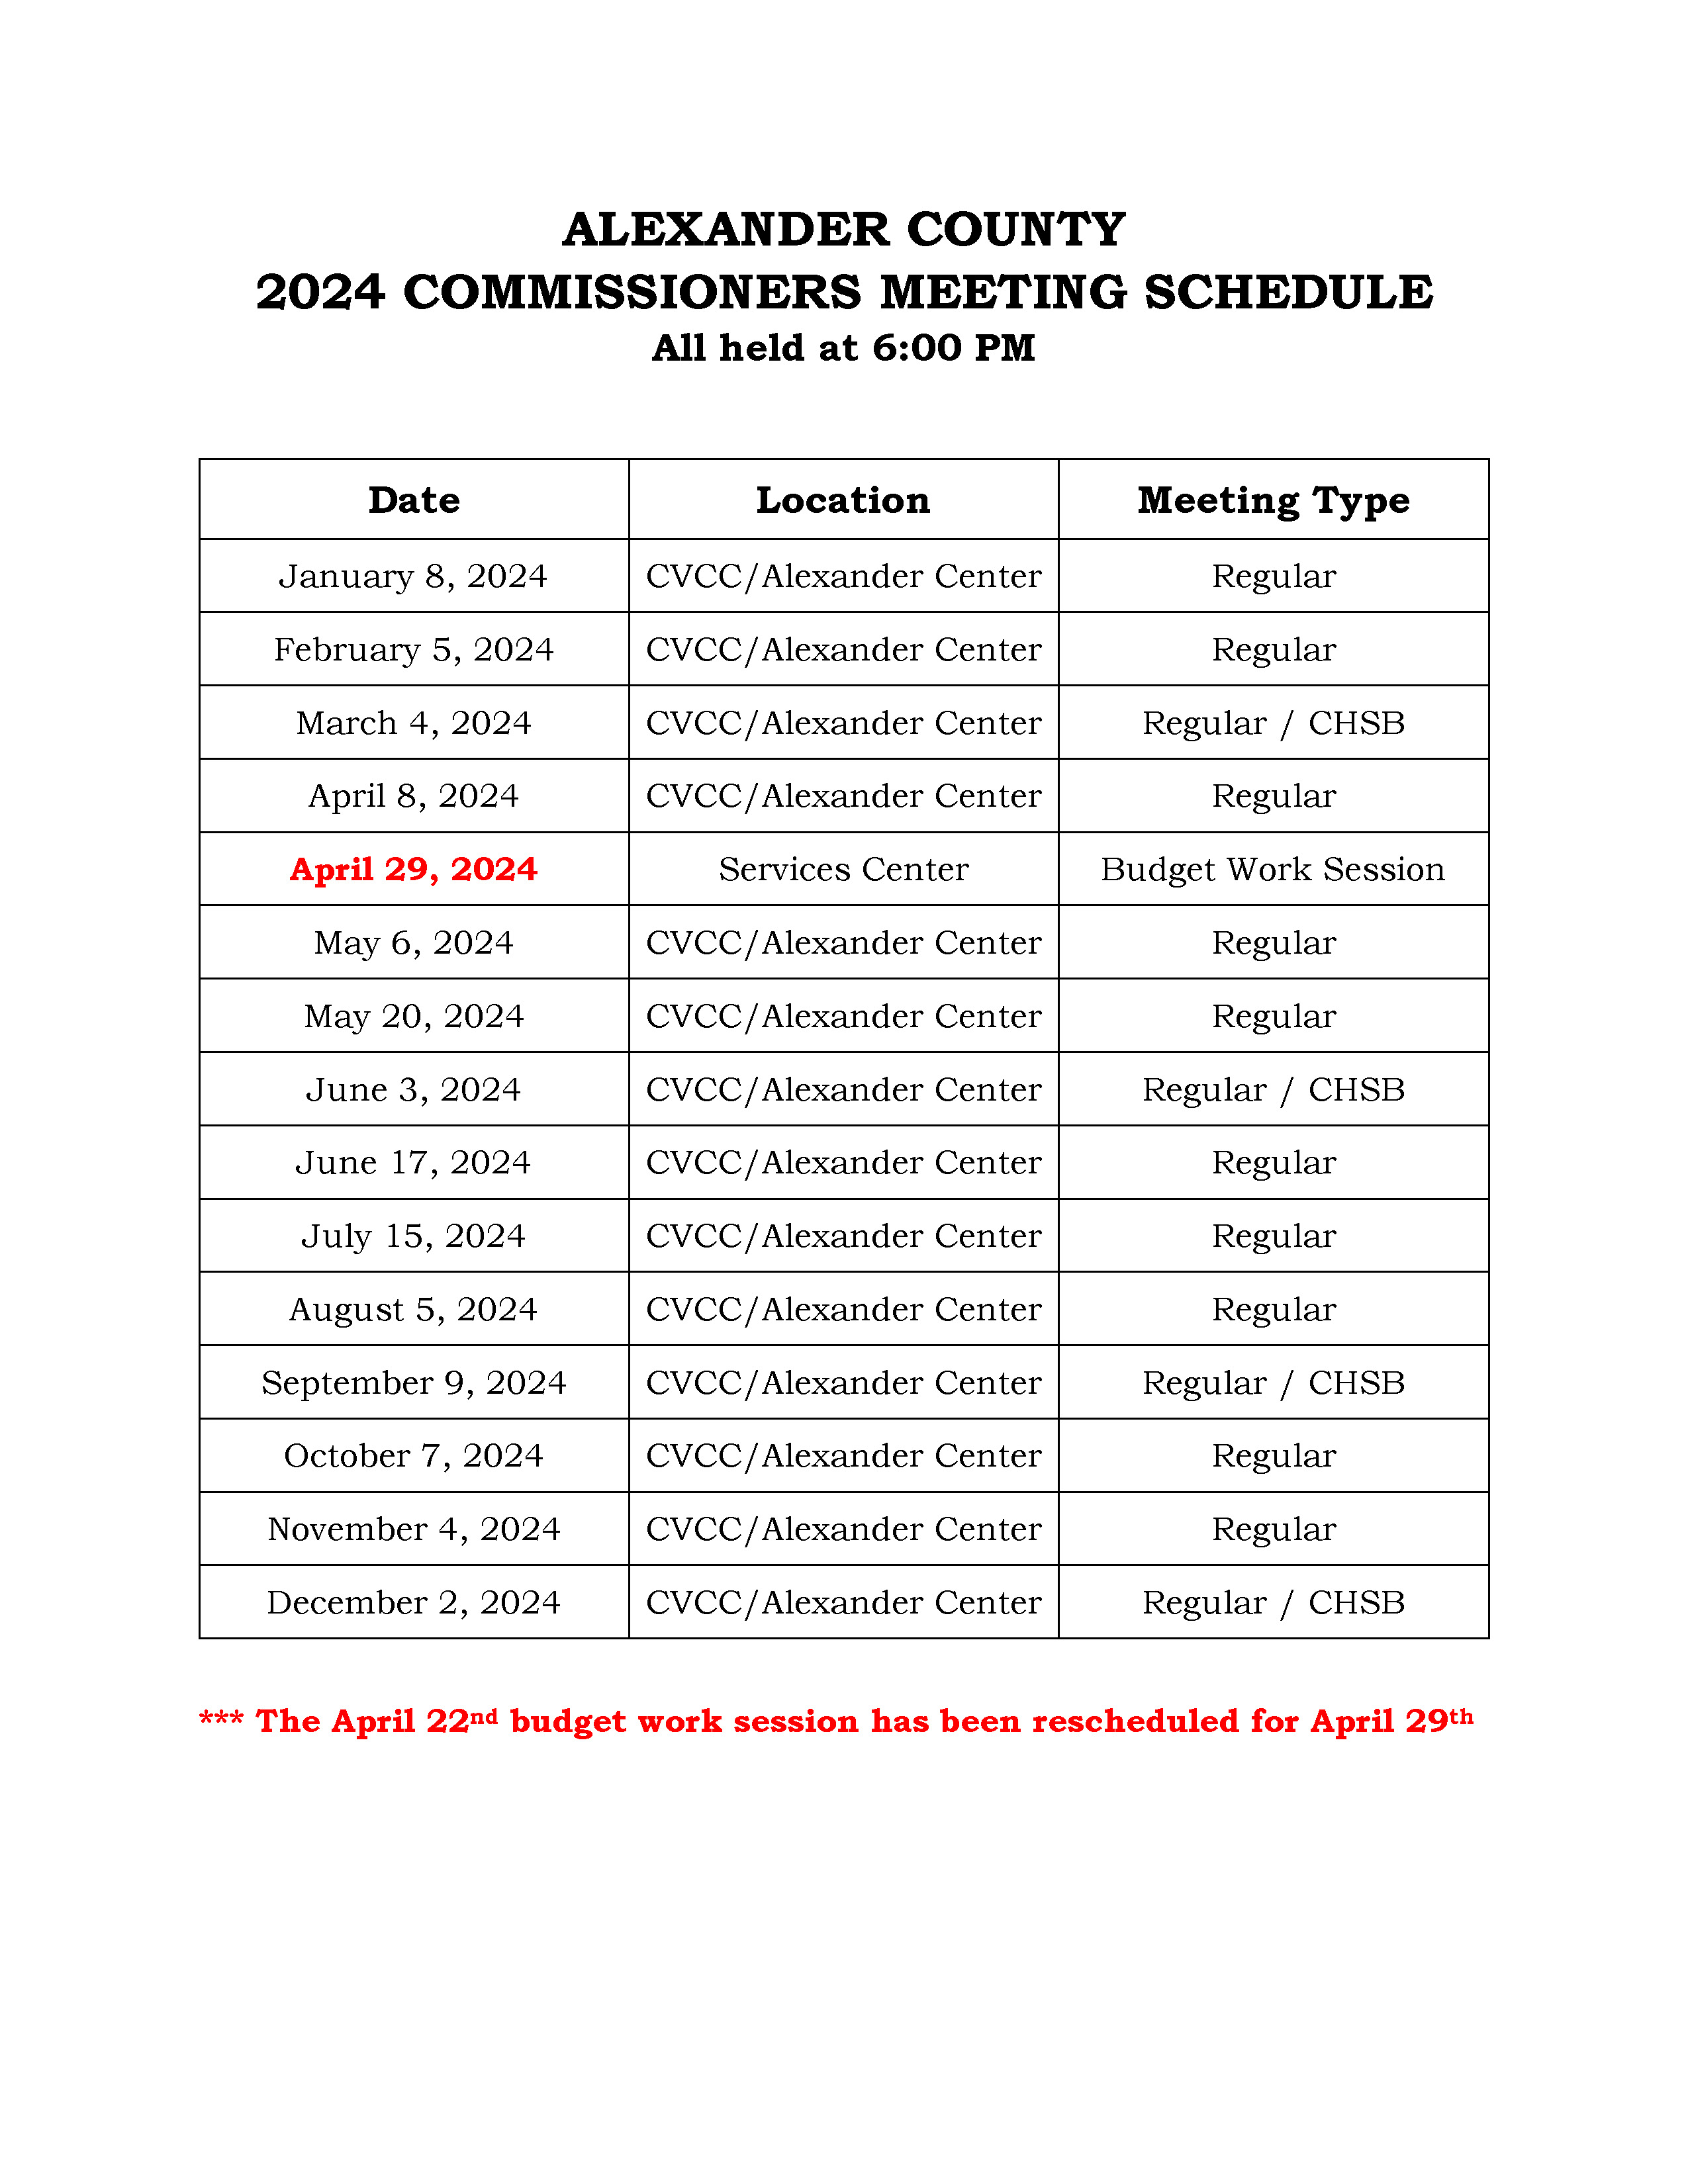 commissioners_meeting_schedule